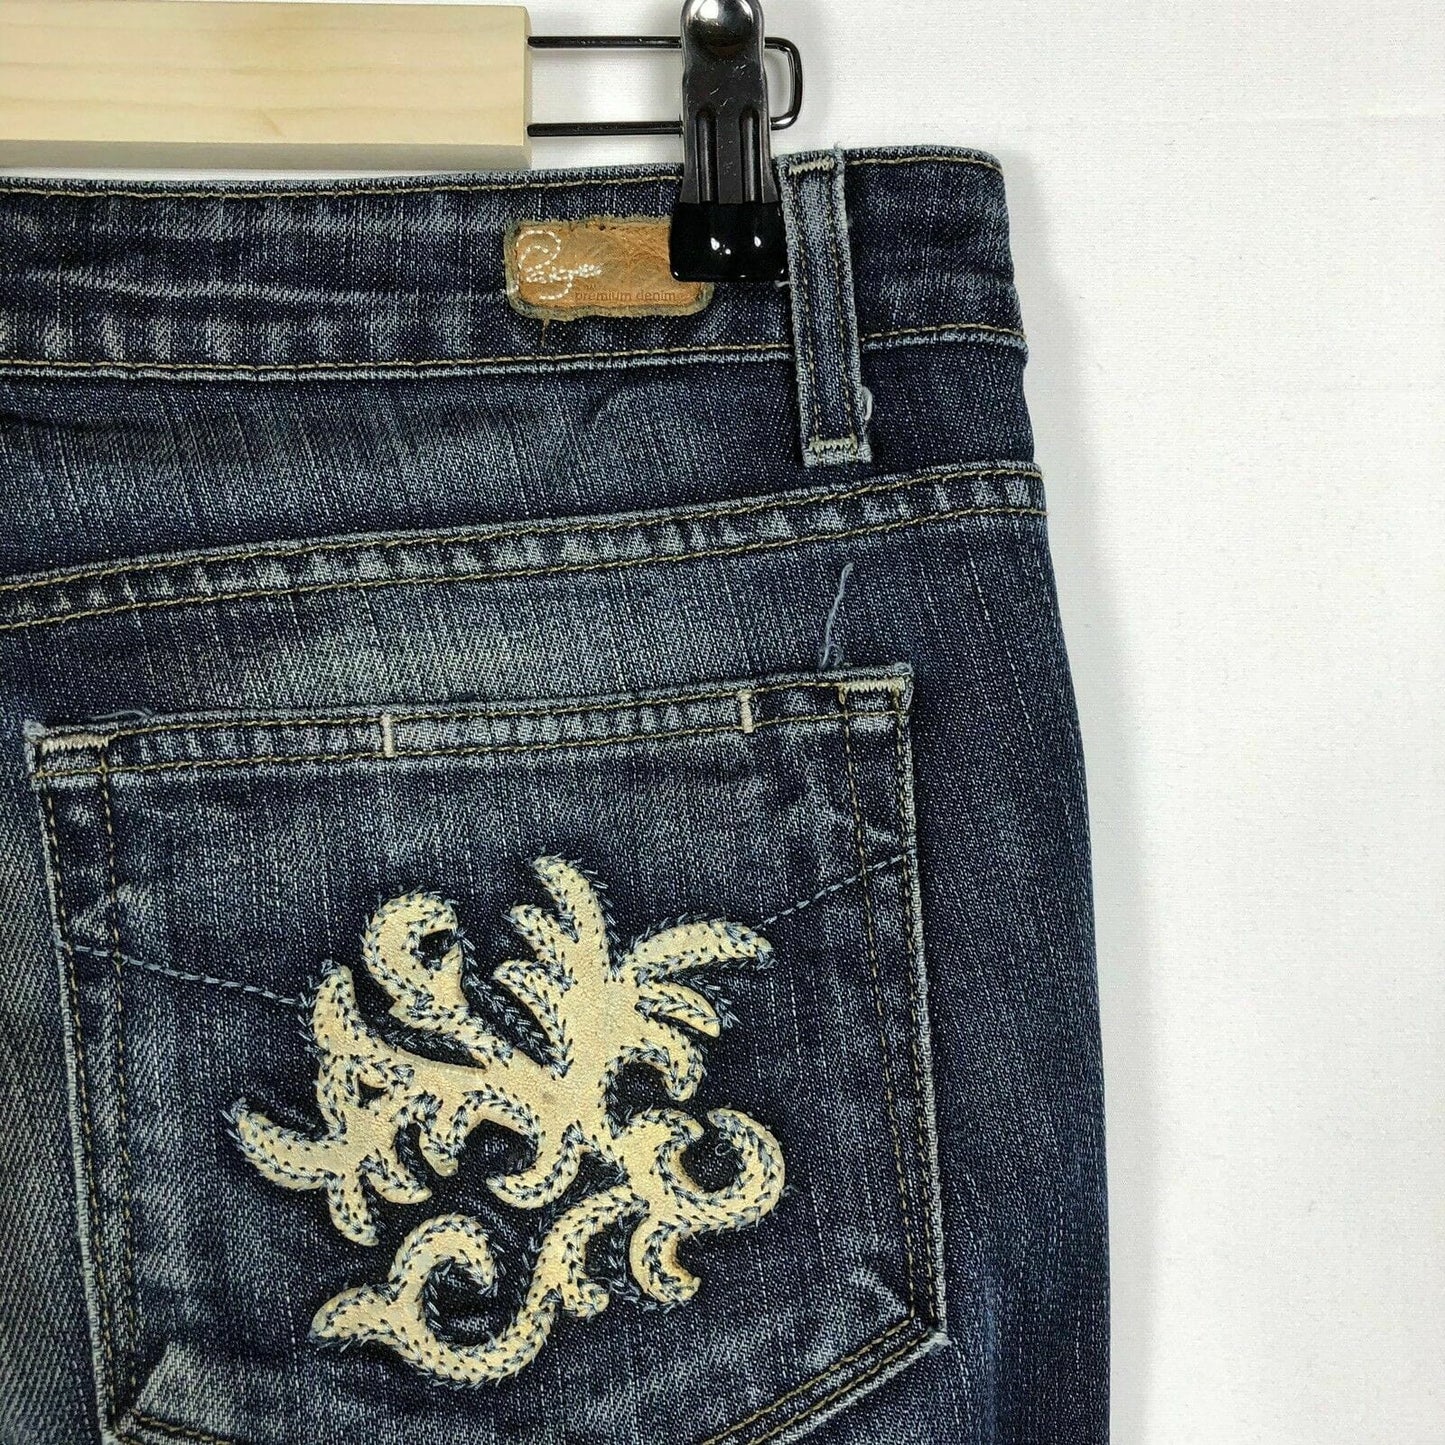 Paige Womens Denim “Benedict Canyon” Jeans, Blue - Size 30 Embroidered